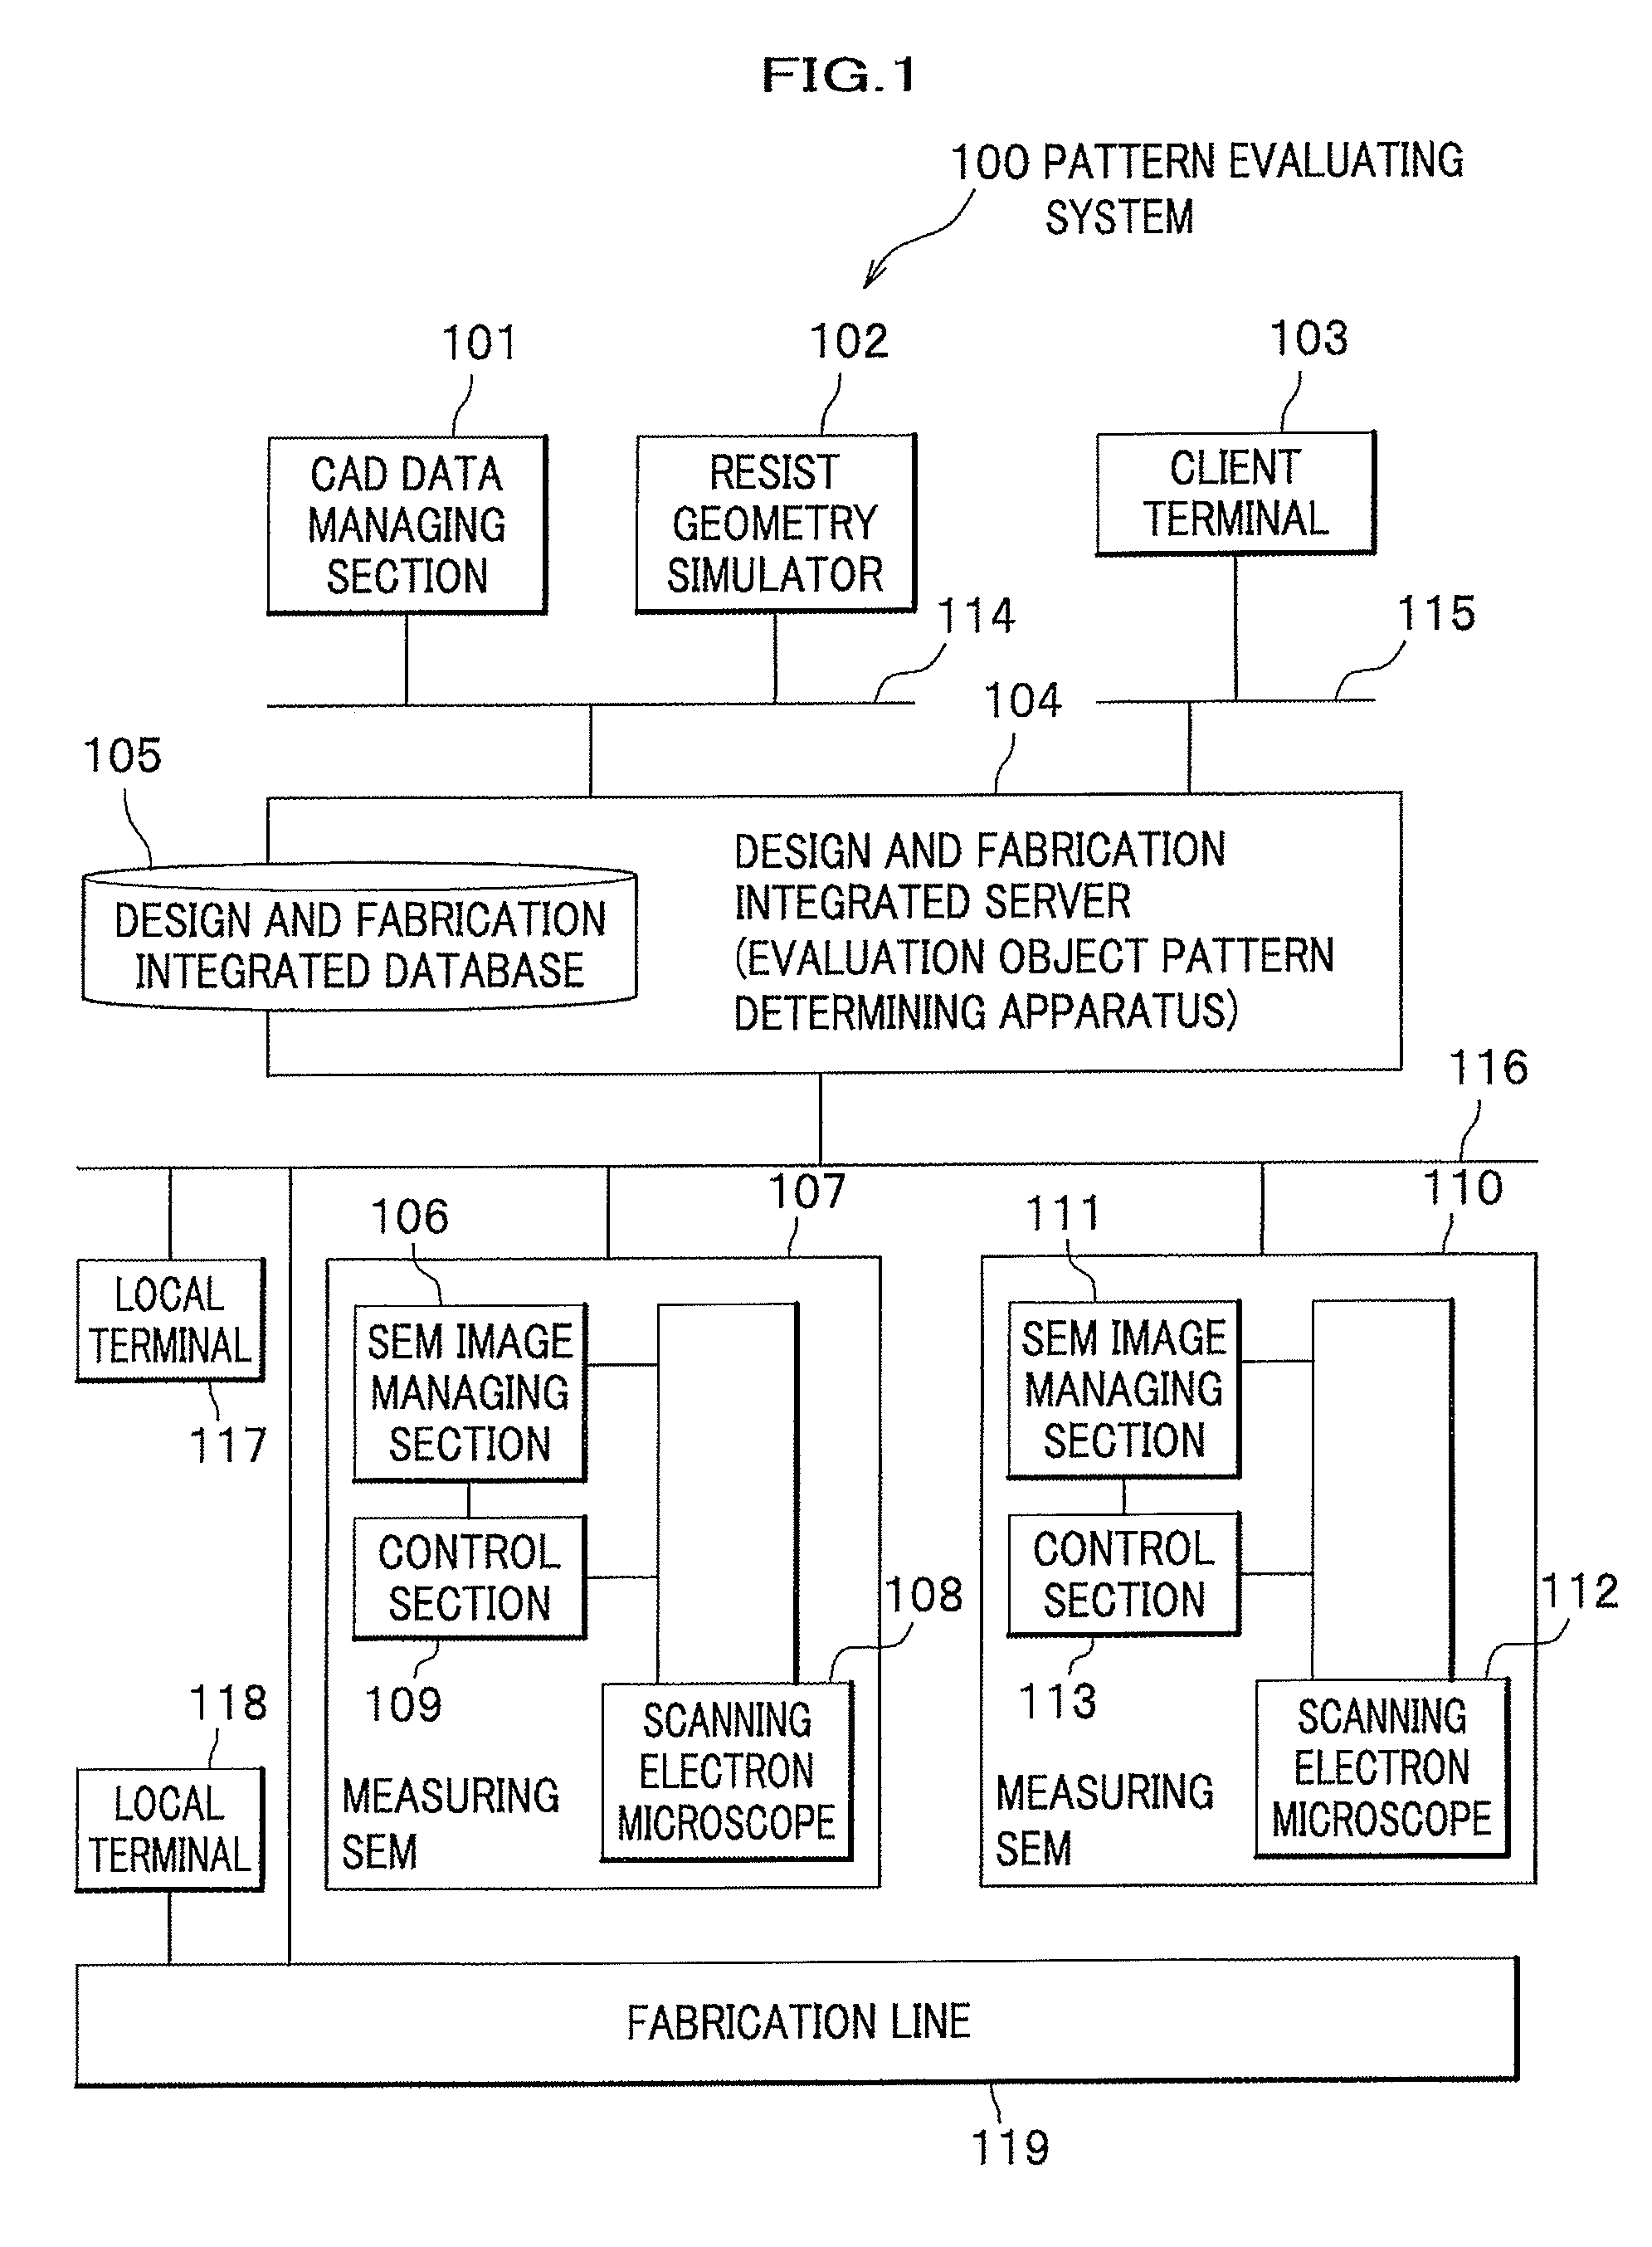 Evaluation object pattern determining apparatus, evaluation object pattern determining method, evaluation object pattern determining program and pattern evaluating system